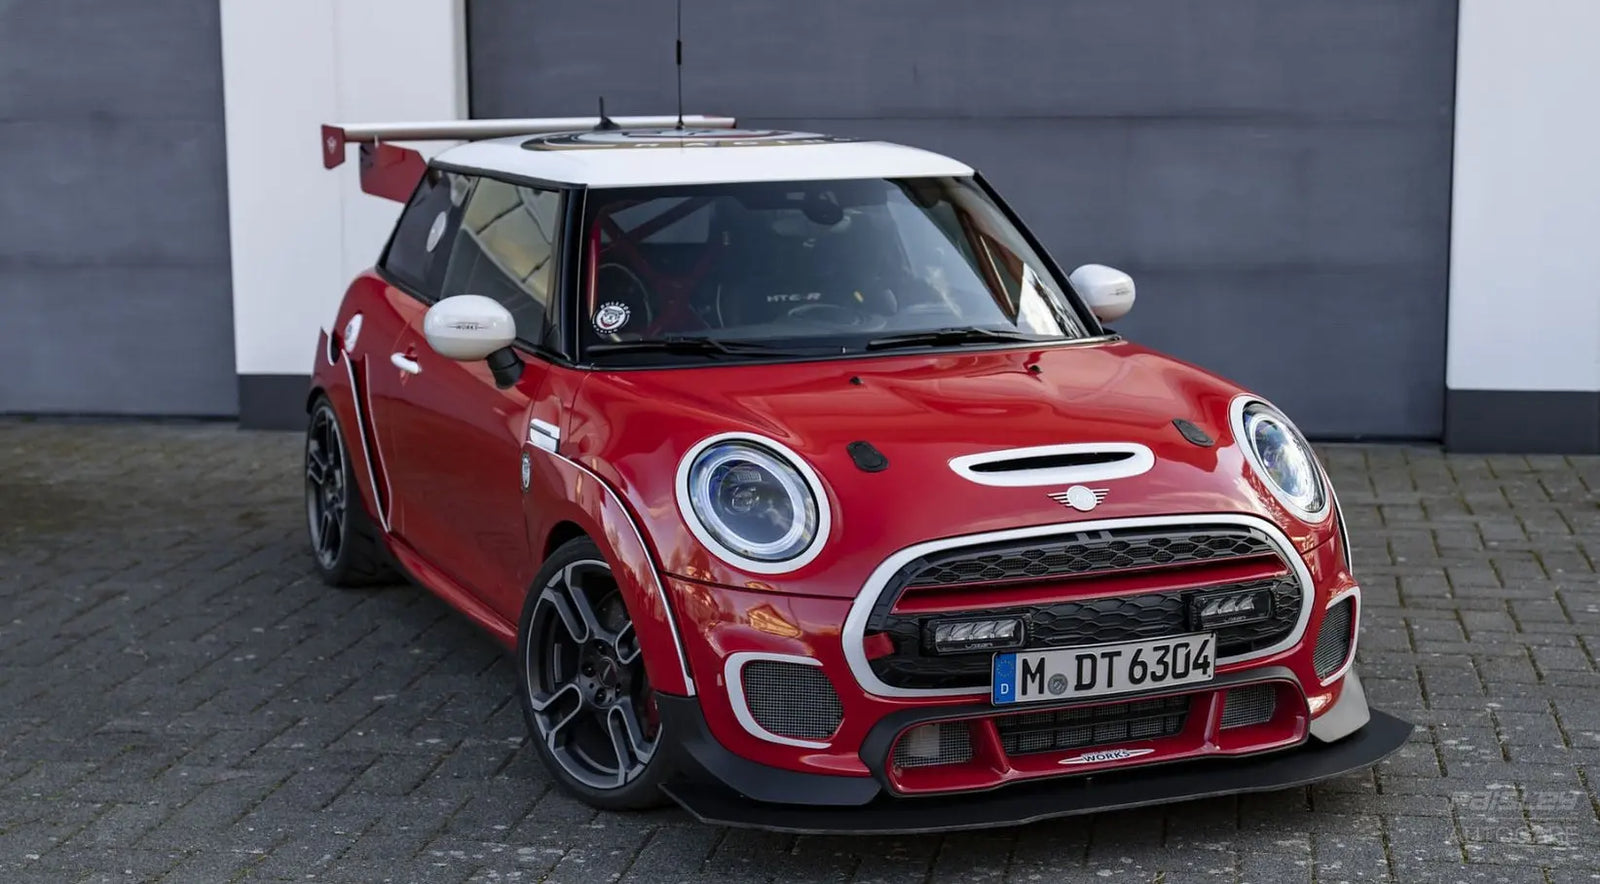 MINI John Cooper Works 24h Nürburgring - How this race is one of the toughest endurance races on Earth | Paisley Autocare